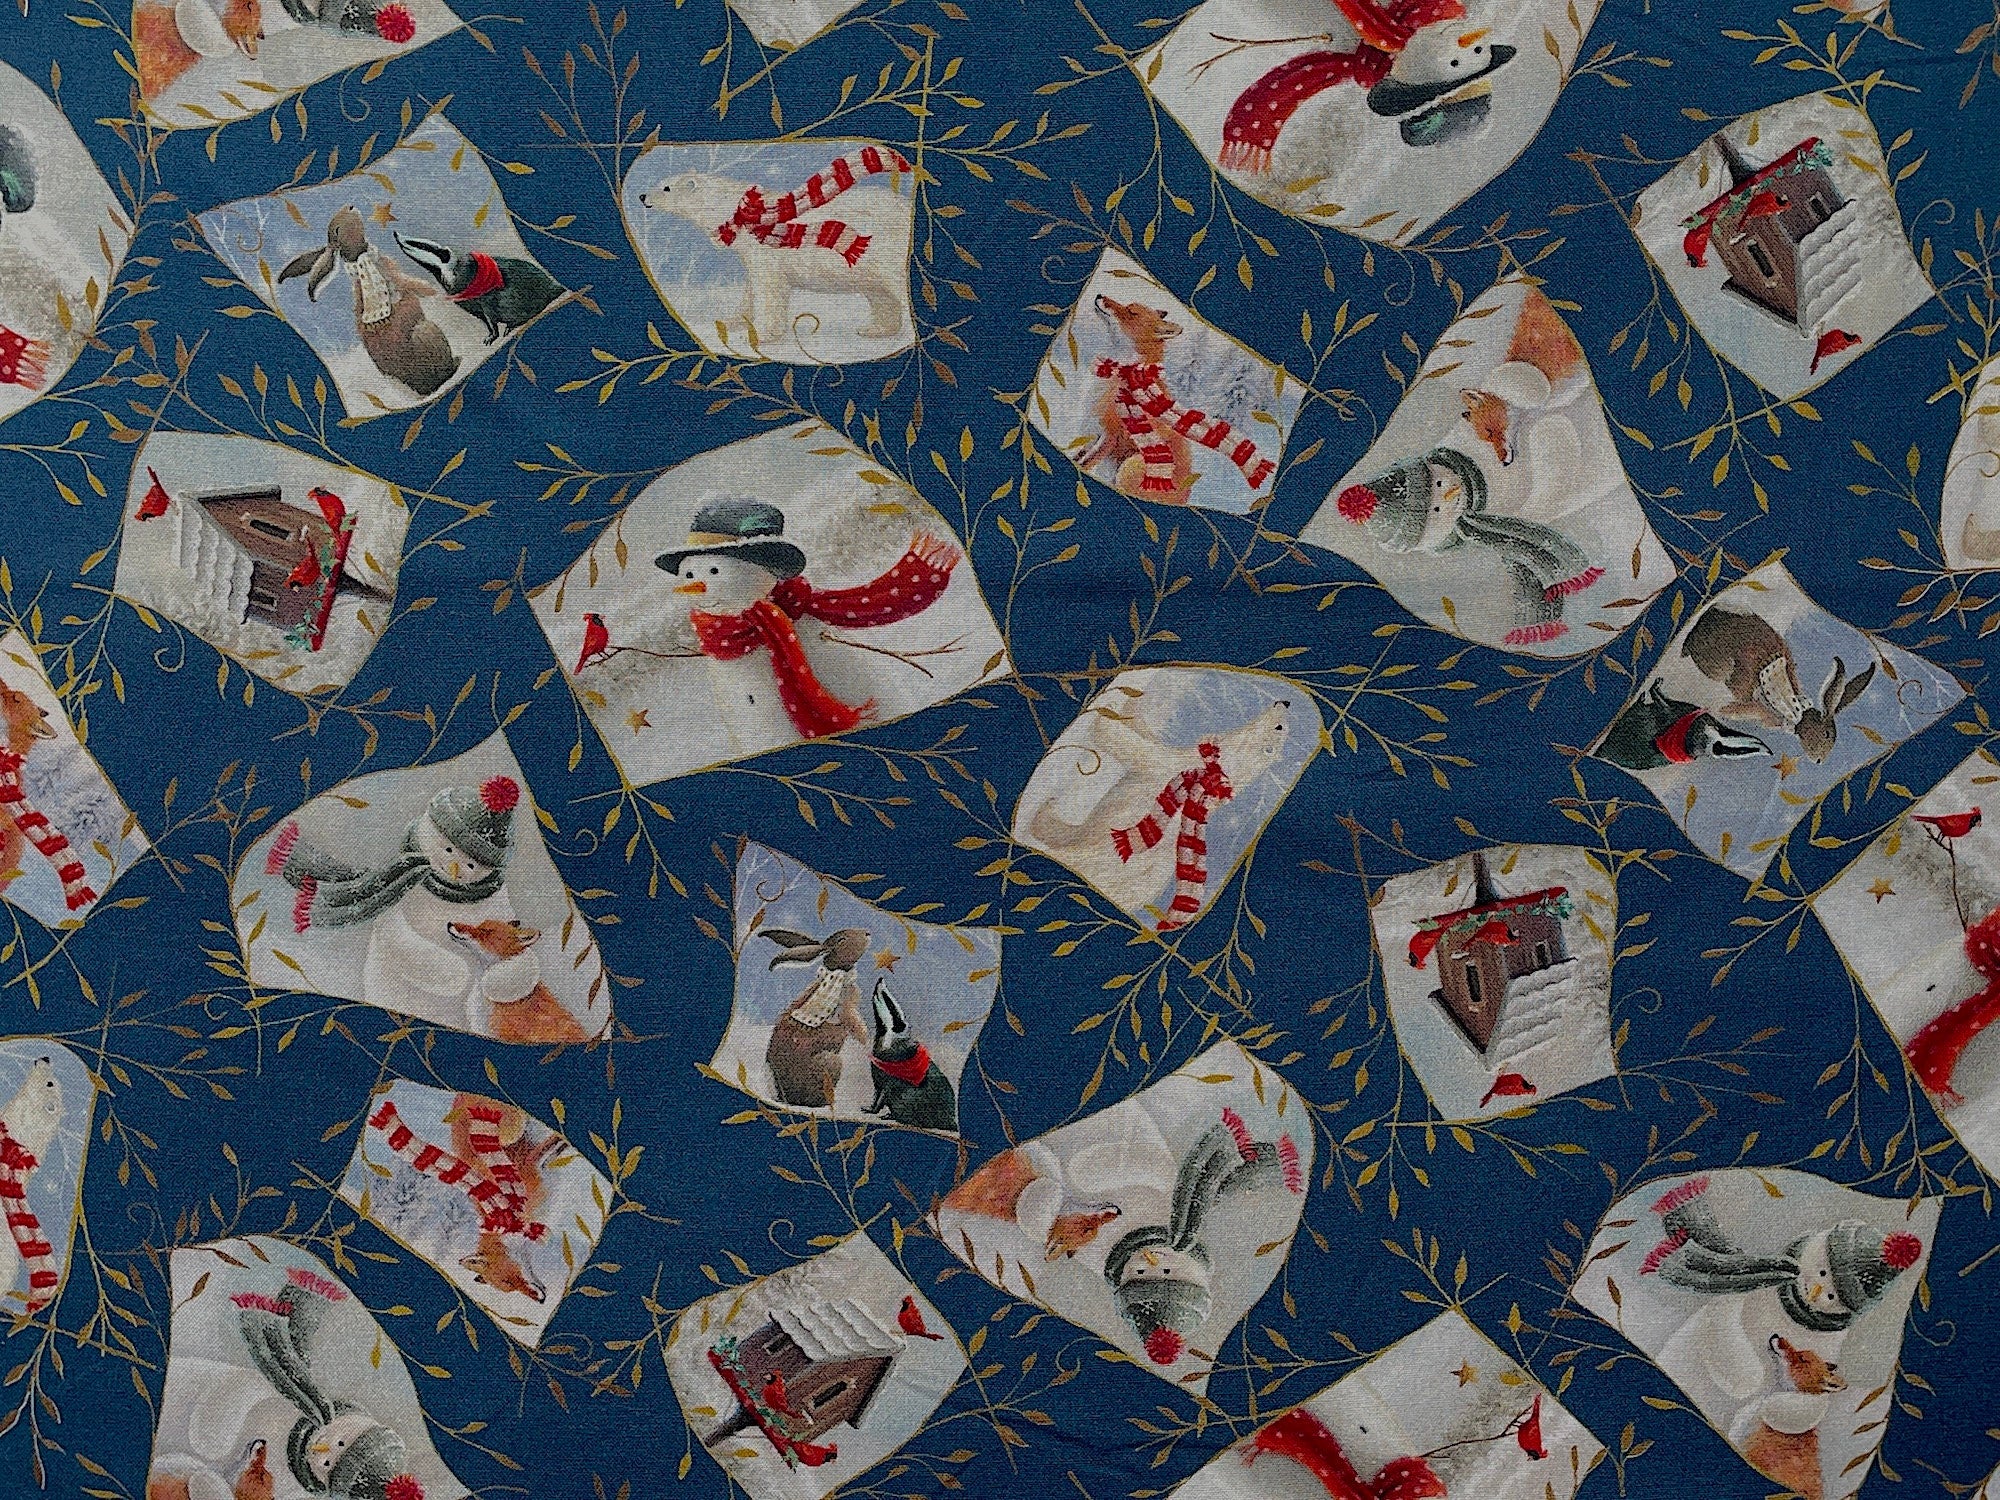 This blue fabric is covered with snowmen, bird houses, birds and other wildlife such as bears, bunnies and fox.